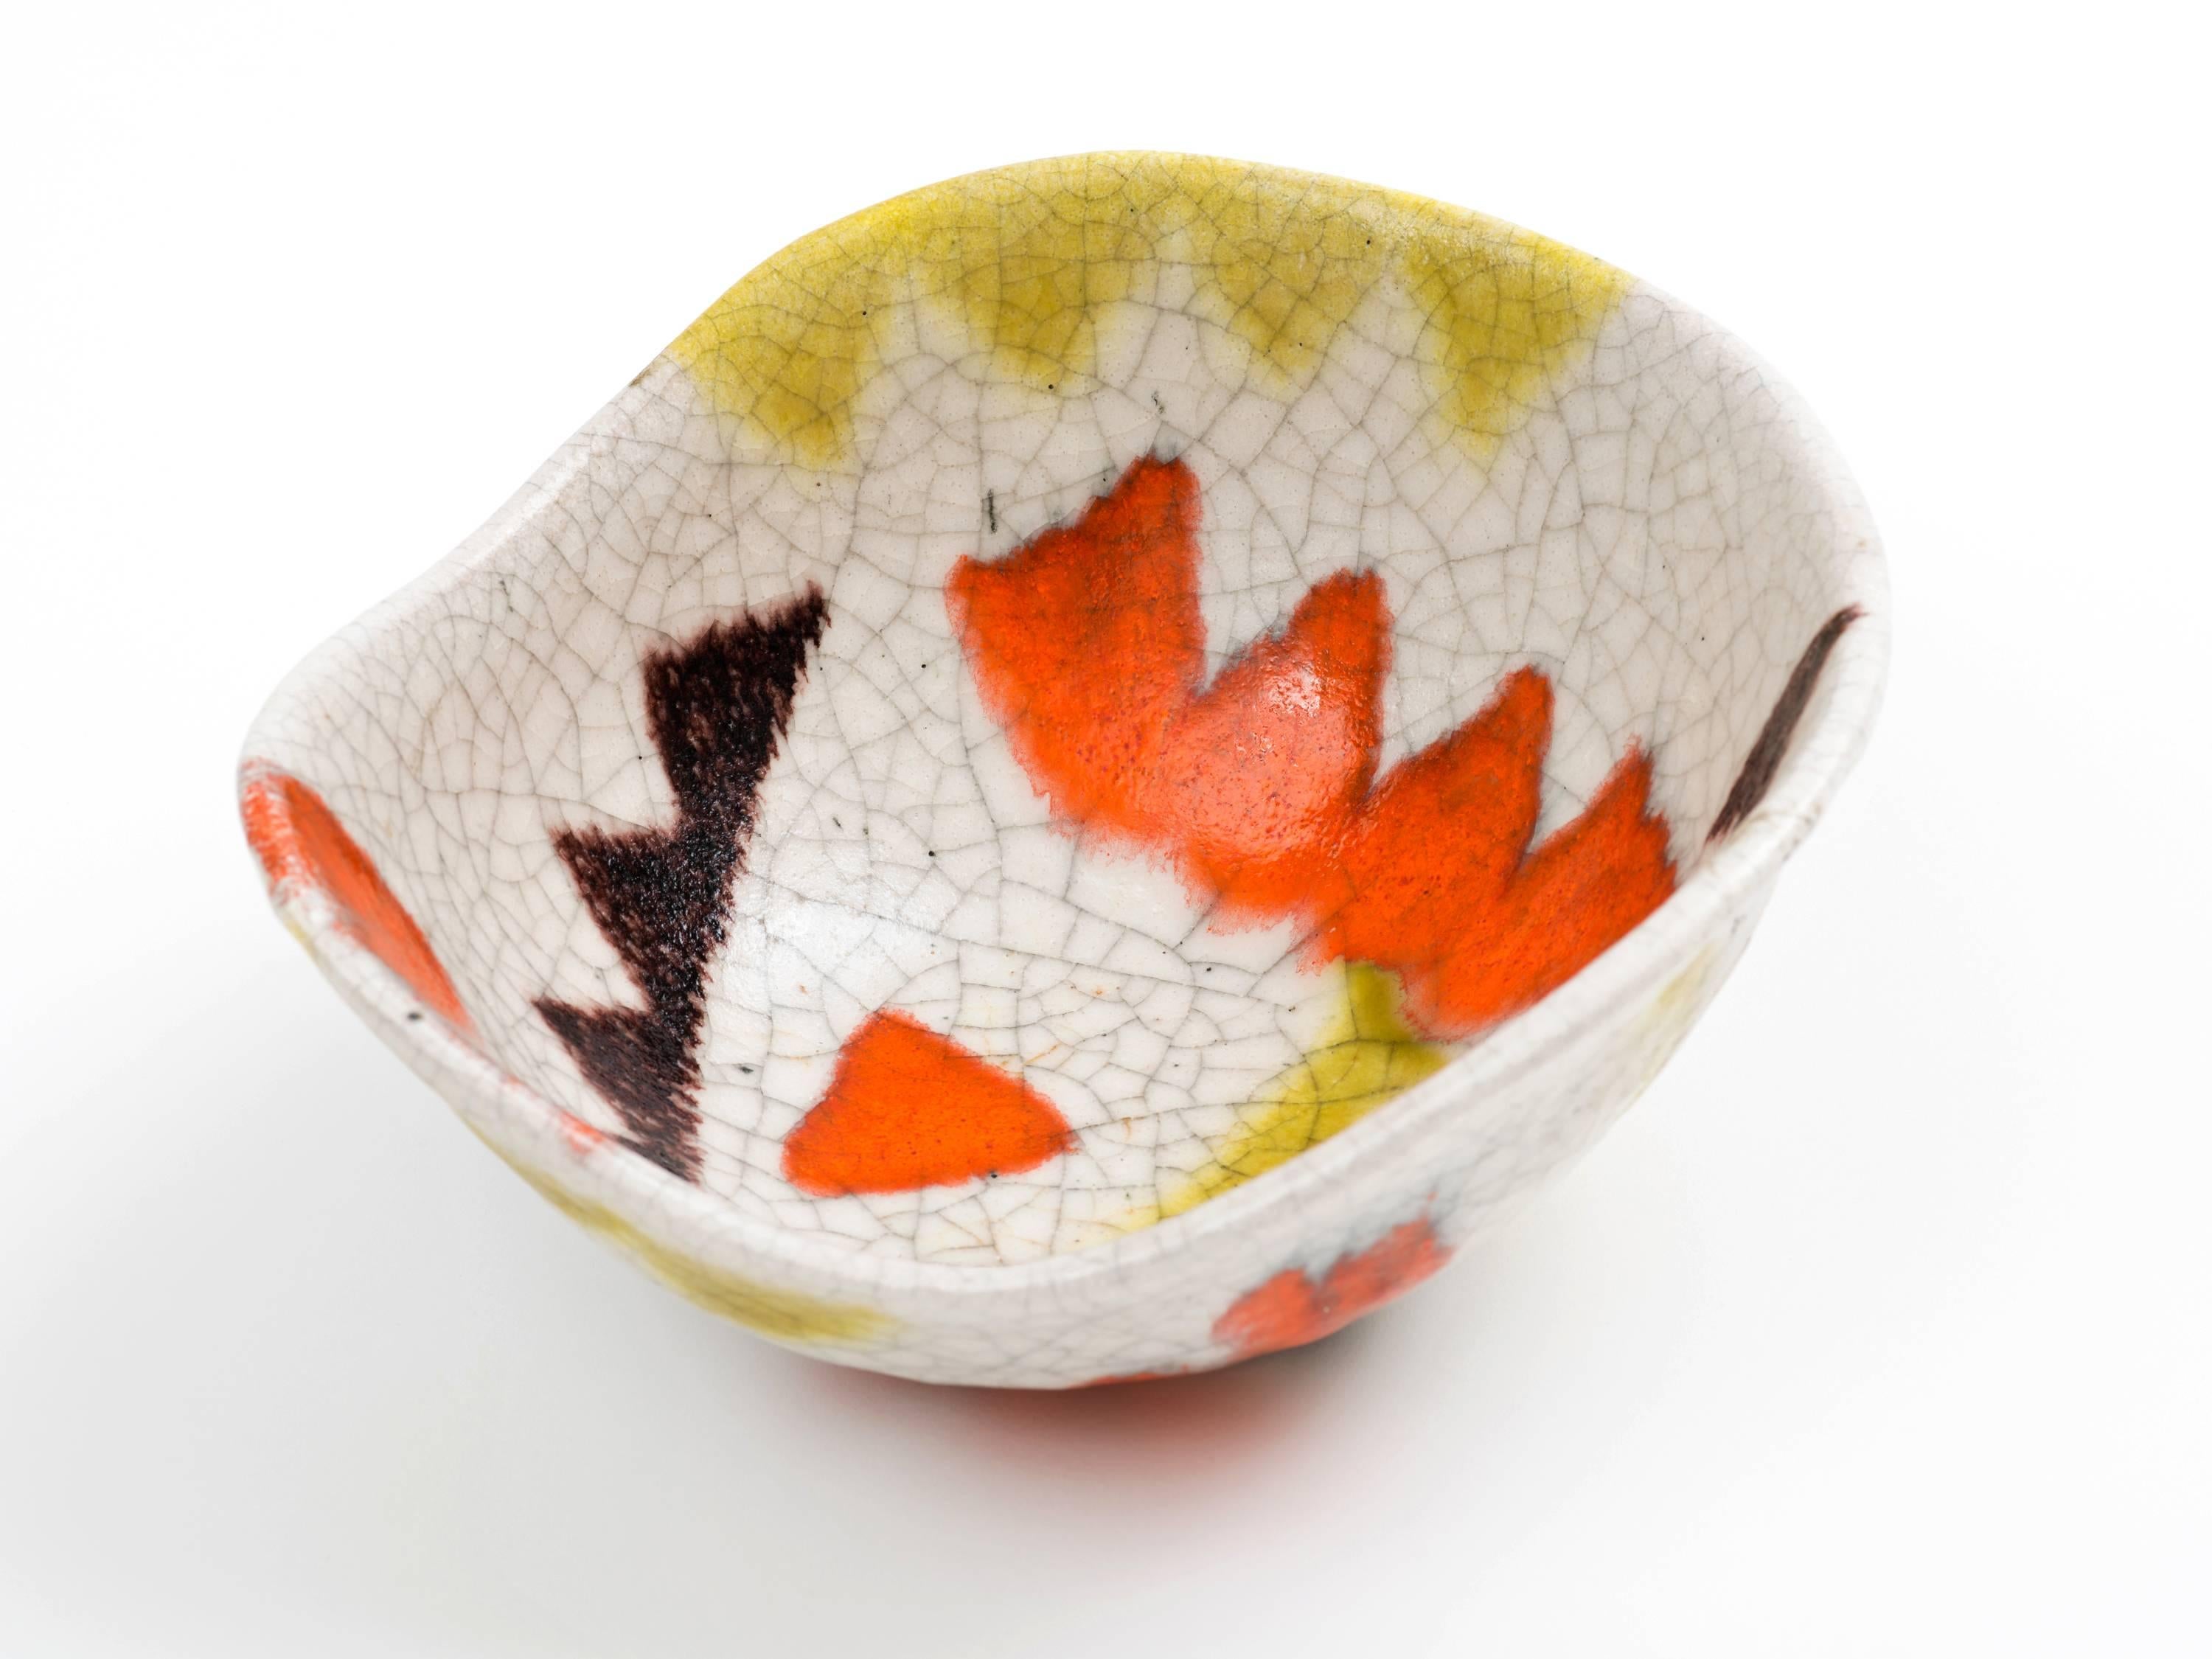 A freeform pottery bowl by Guido Gambone with applied triangular motif decoration in coral, eggplant, and ochre on an ivory ground. Lively tribal design with nice scale - - it's larger than it may appear in these images so please refer to